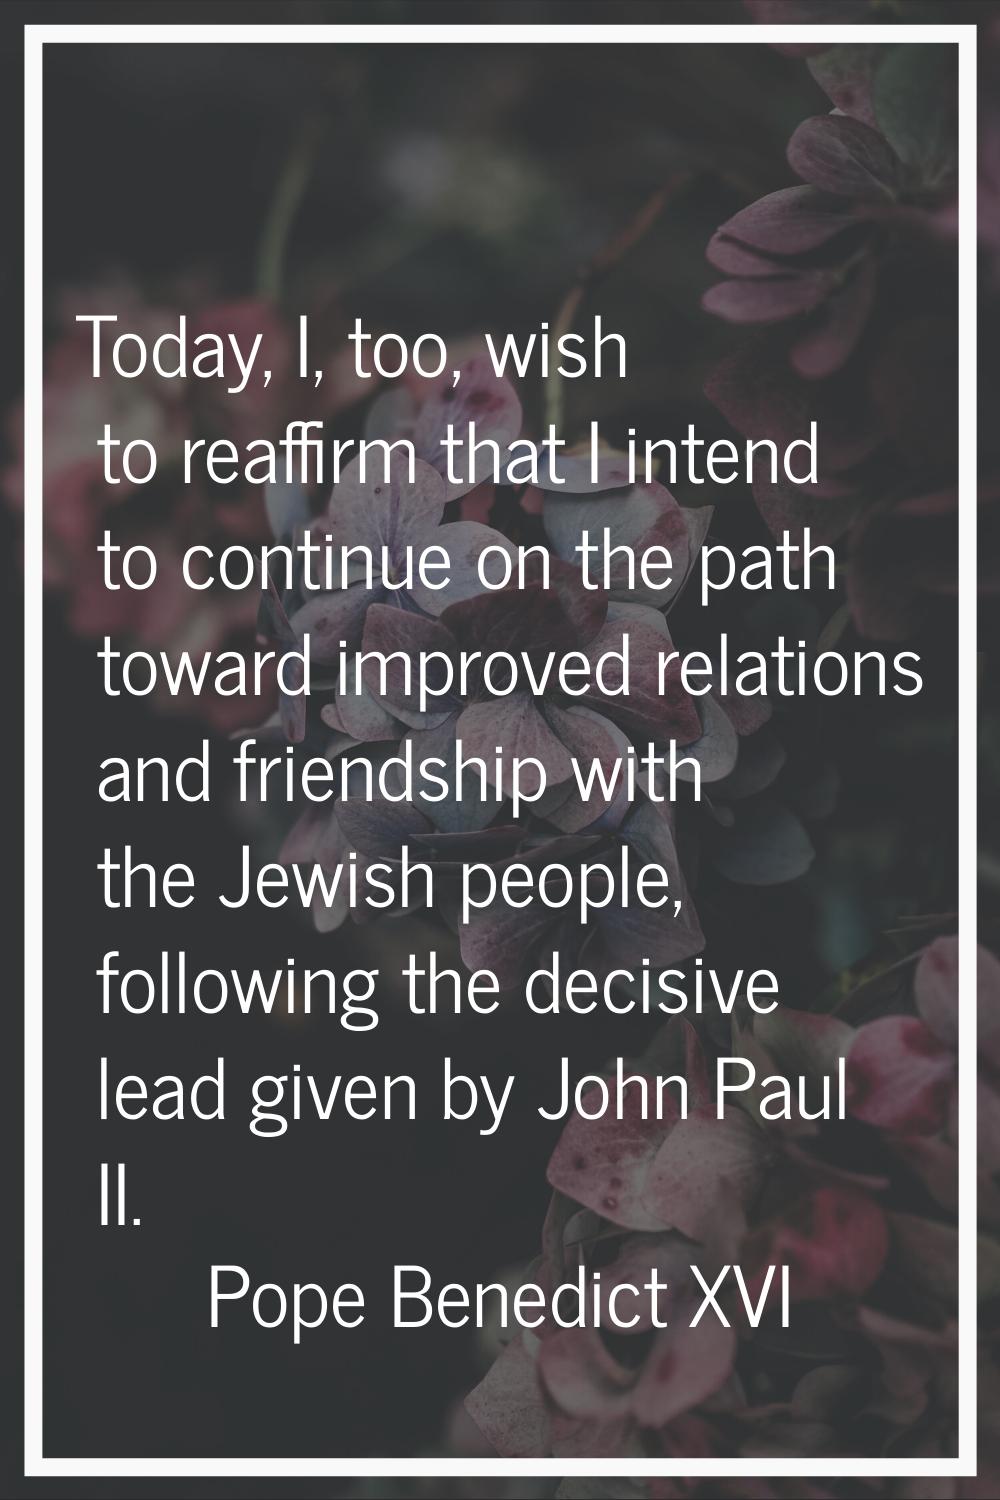 Today, I, too, wish to reaffirm that I intend to continue on the path toward improved relations and